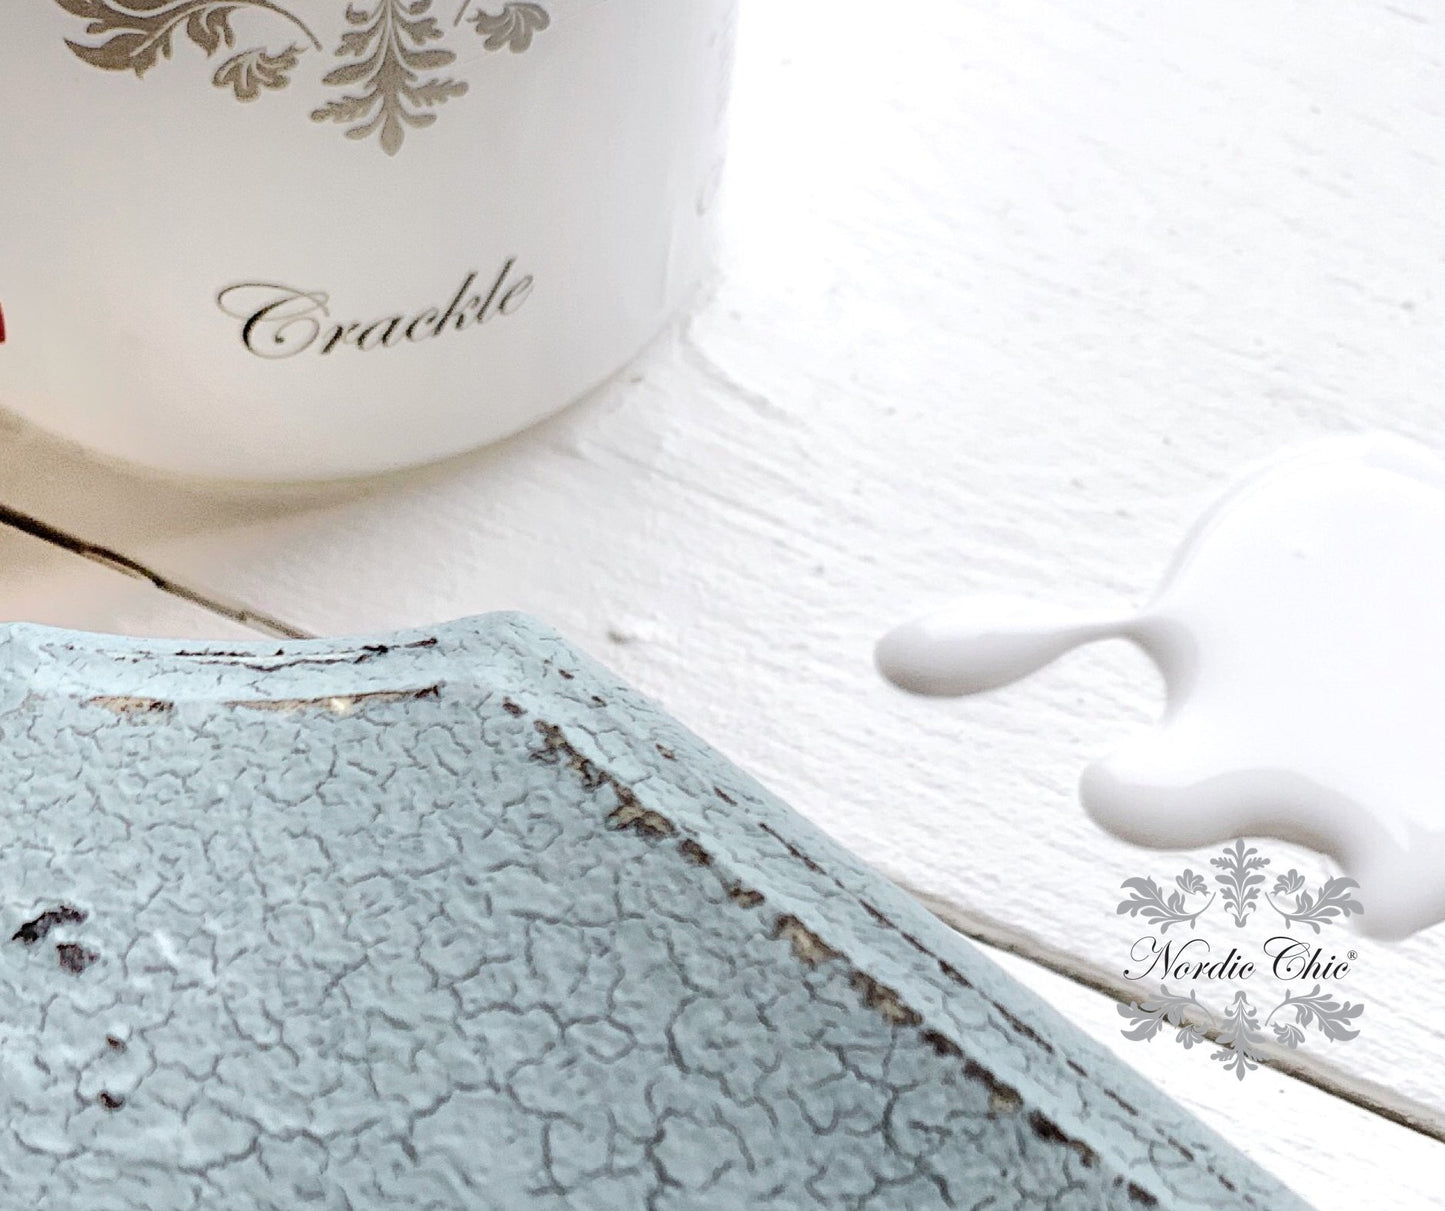 Nordic Chic® Crackle - Nordic Chic®